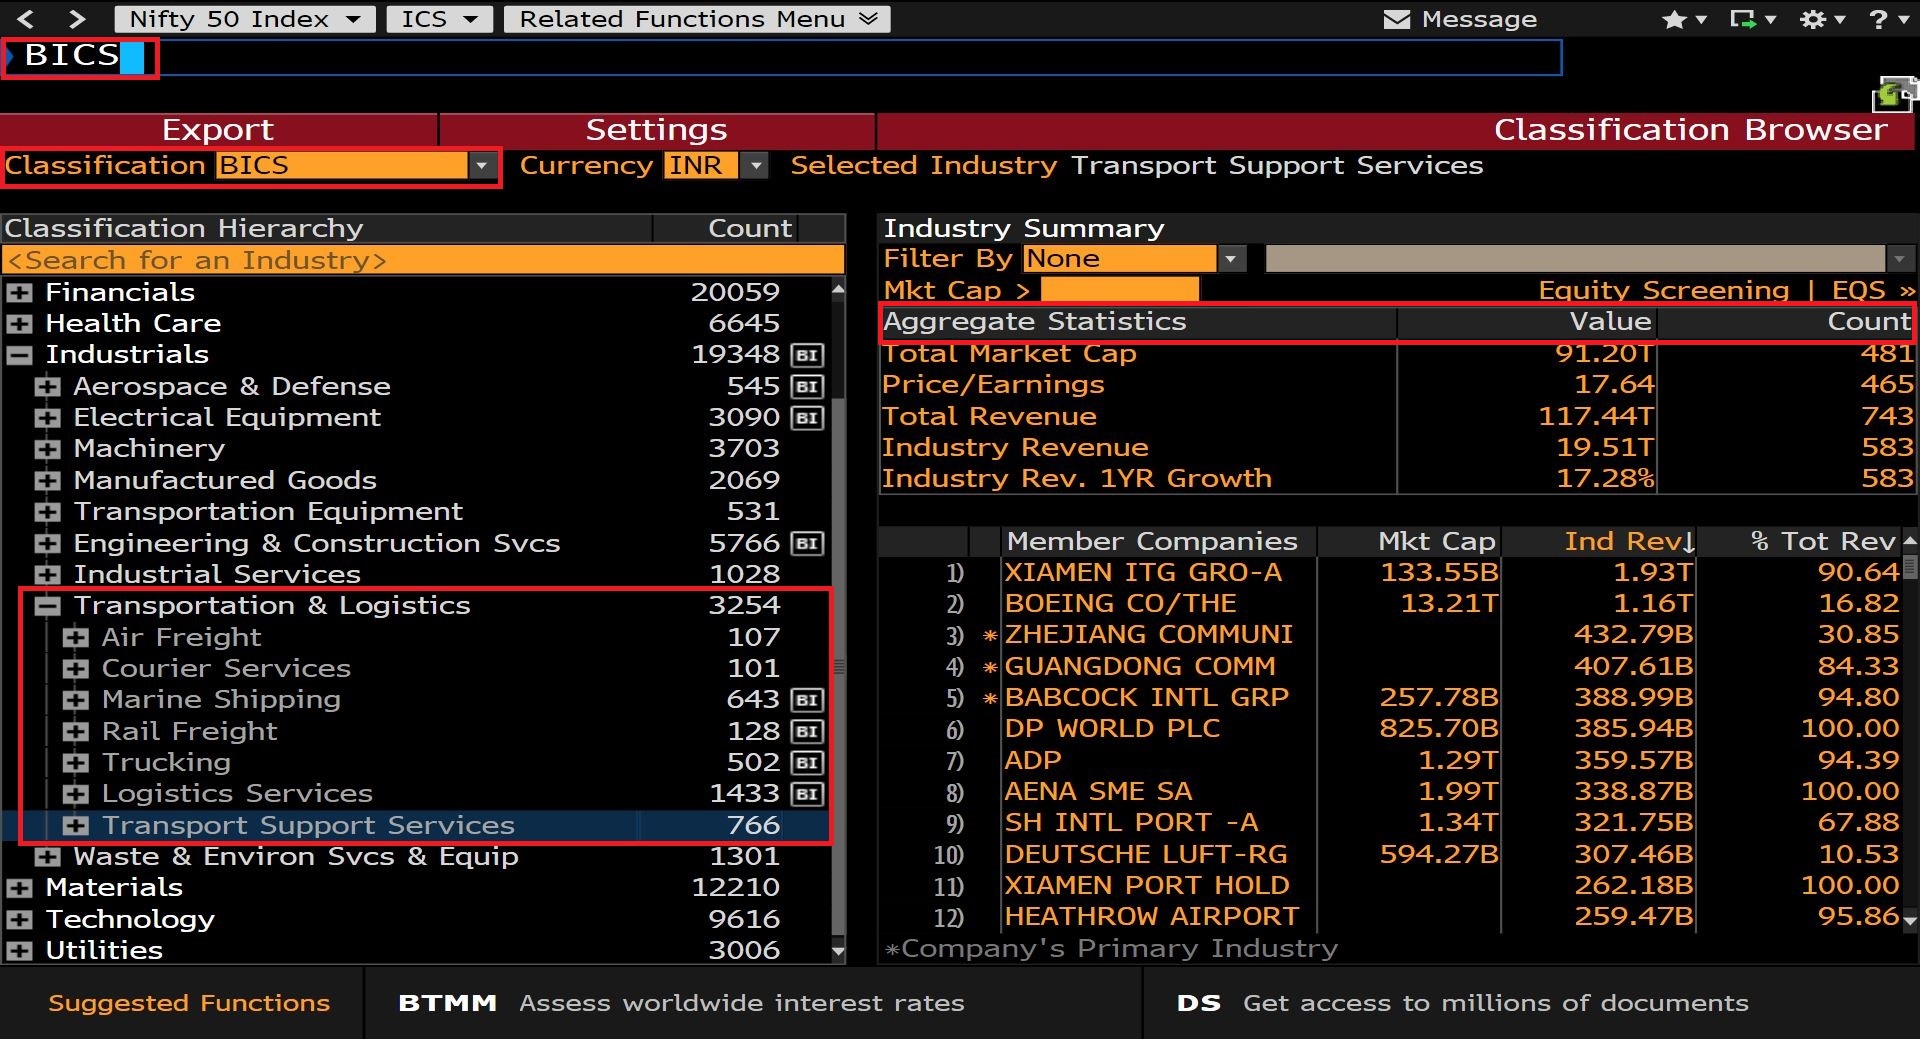 Login to Bloomberg (Available in Library) then Search for BICS and Select Industrials and Click on Transportation & Logistics and Click on Required Industry